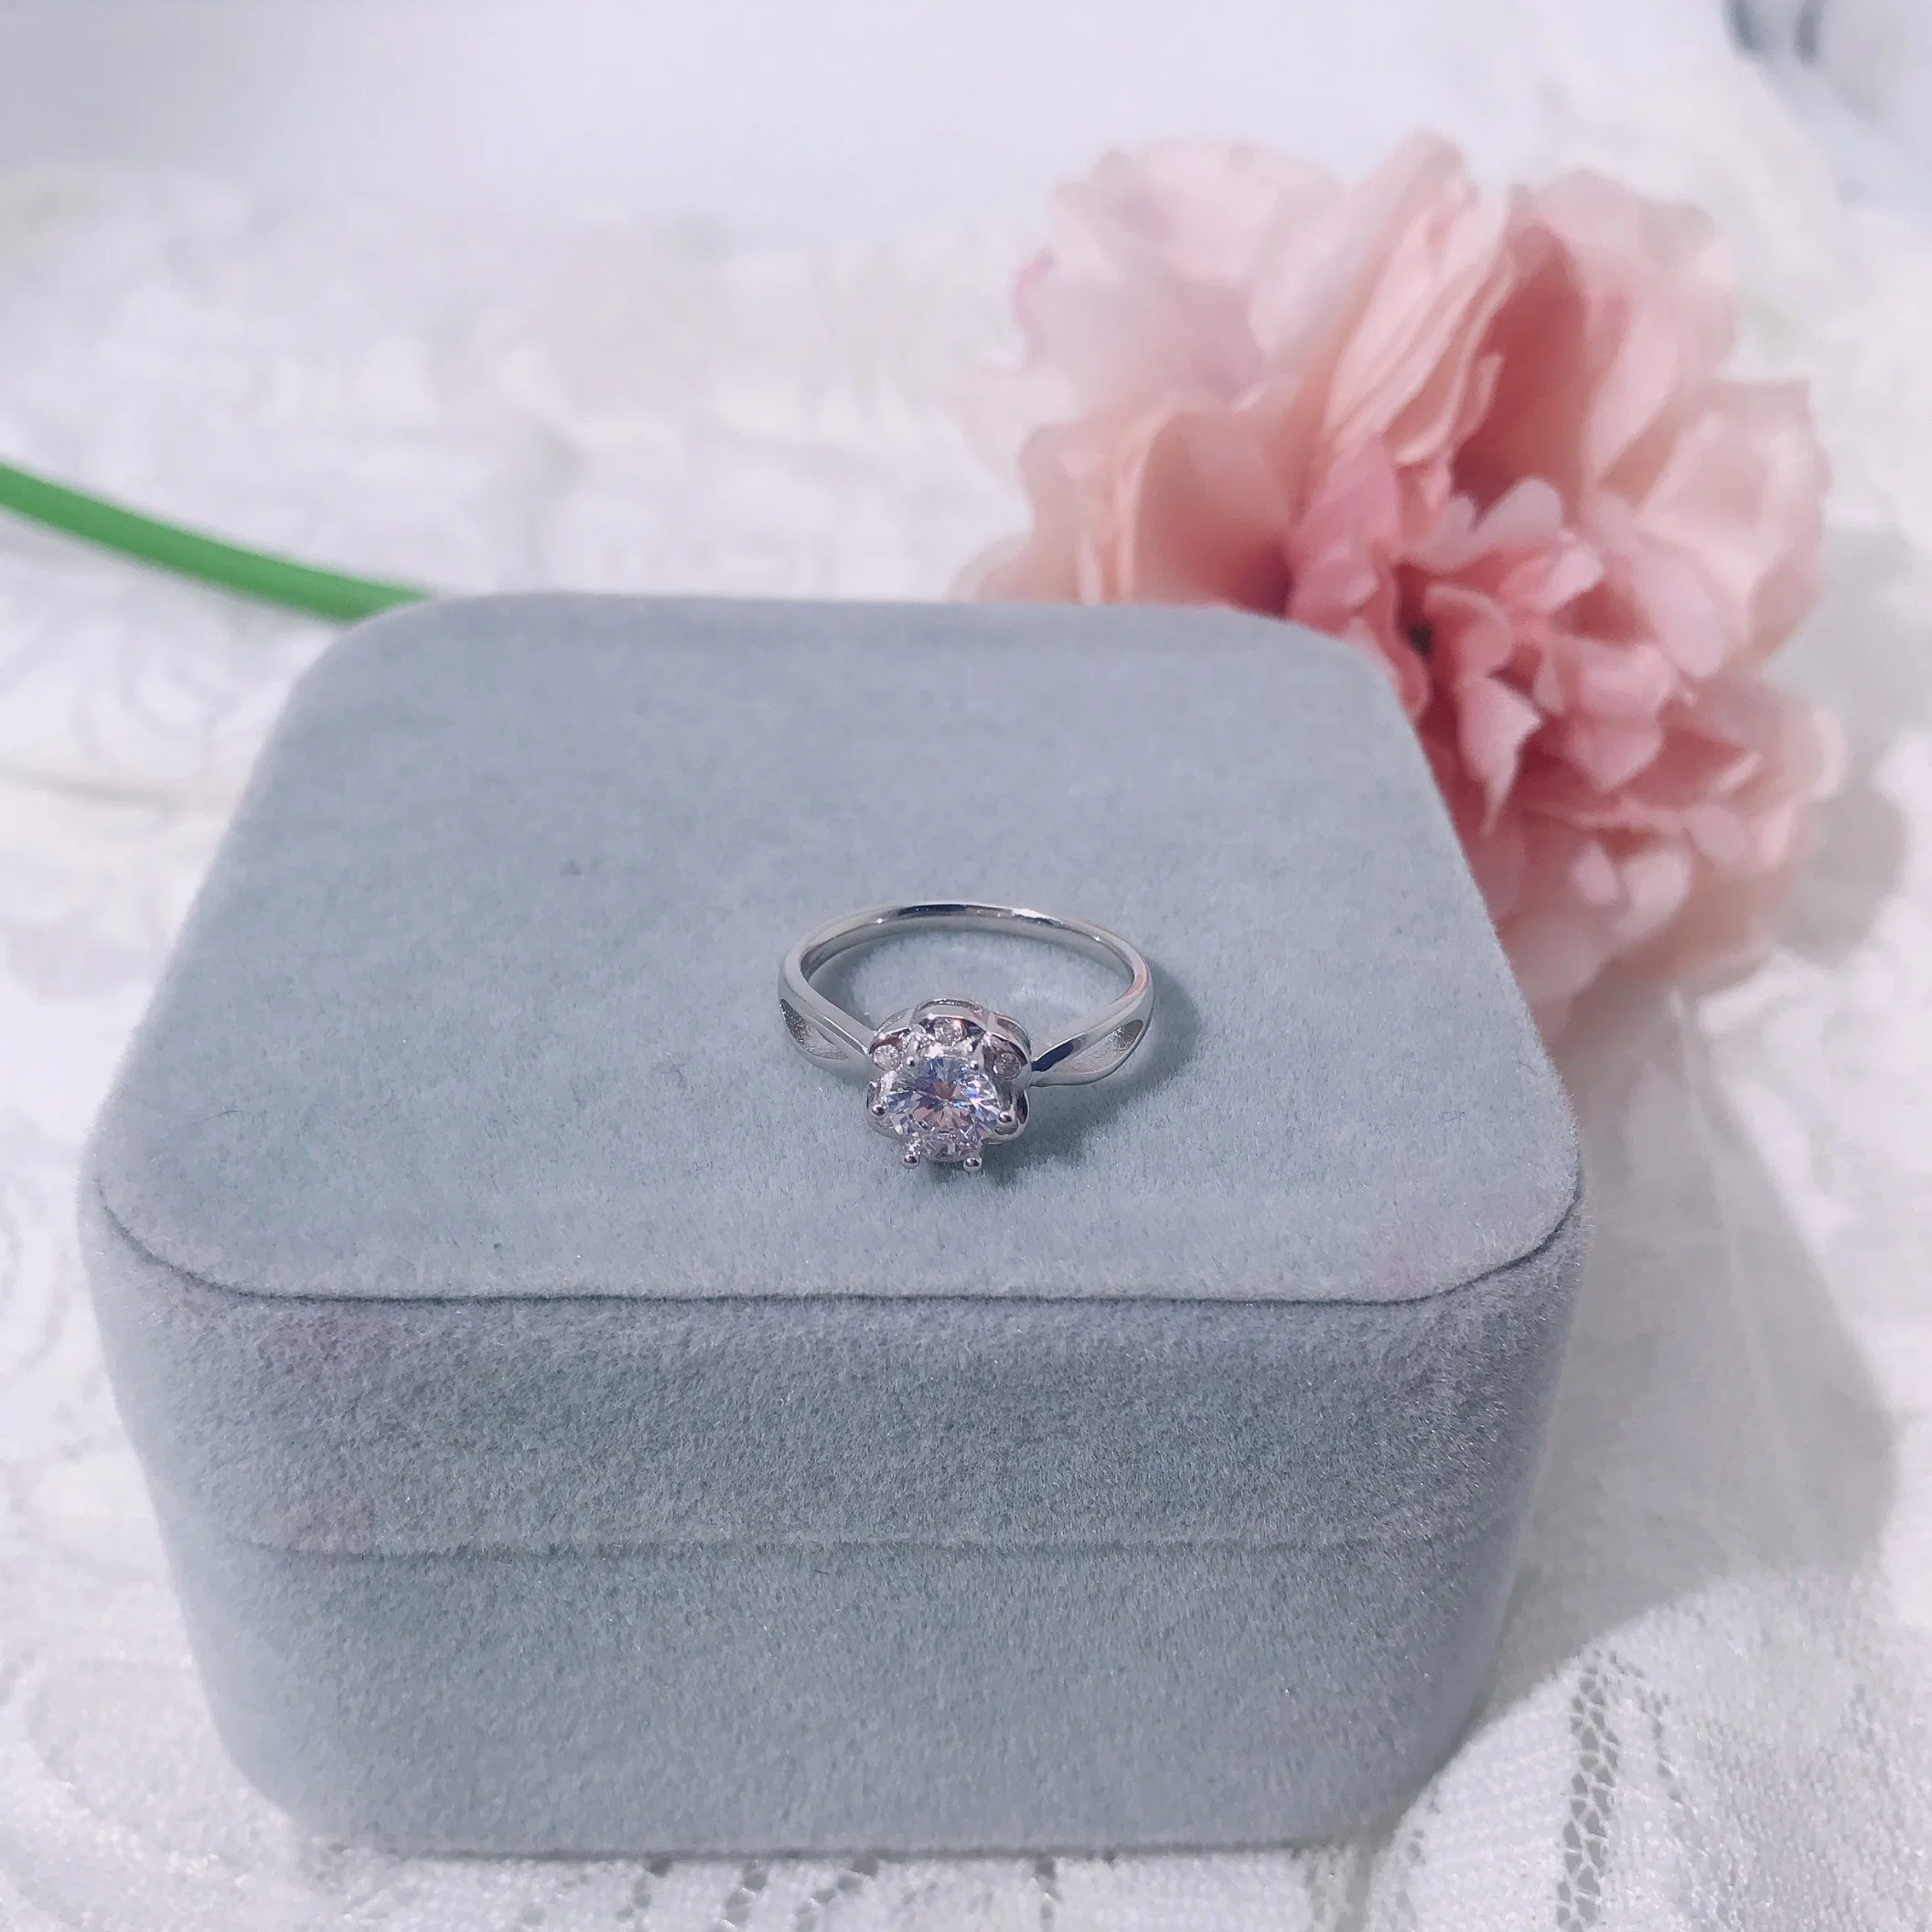 OEM Dem Custom Fashion Wholesale/Supplier 925 Silver Jewelry Solitary Lady Ring New Jewellery Ladies Sterling Gift Classic High Qunlity Pave Zirconia Shine for Women